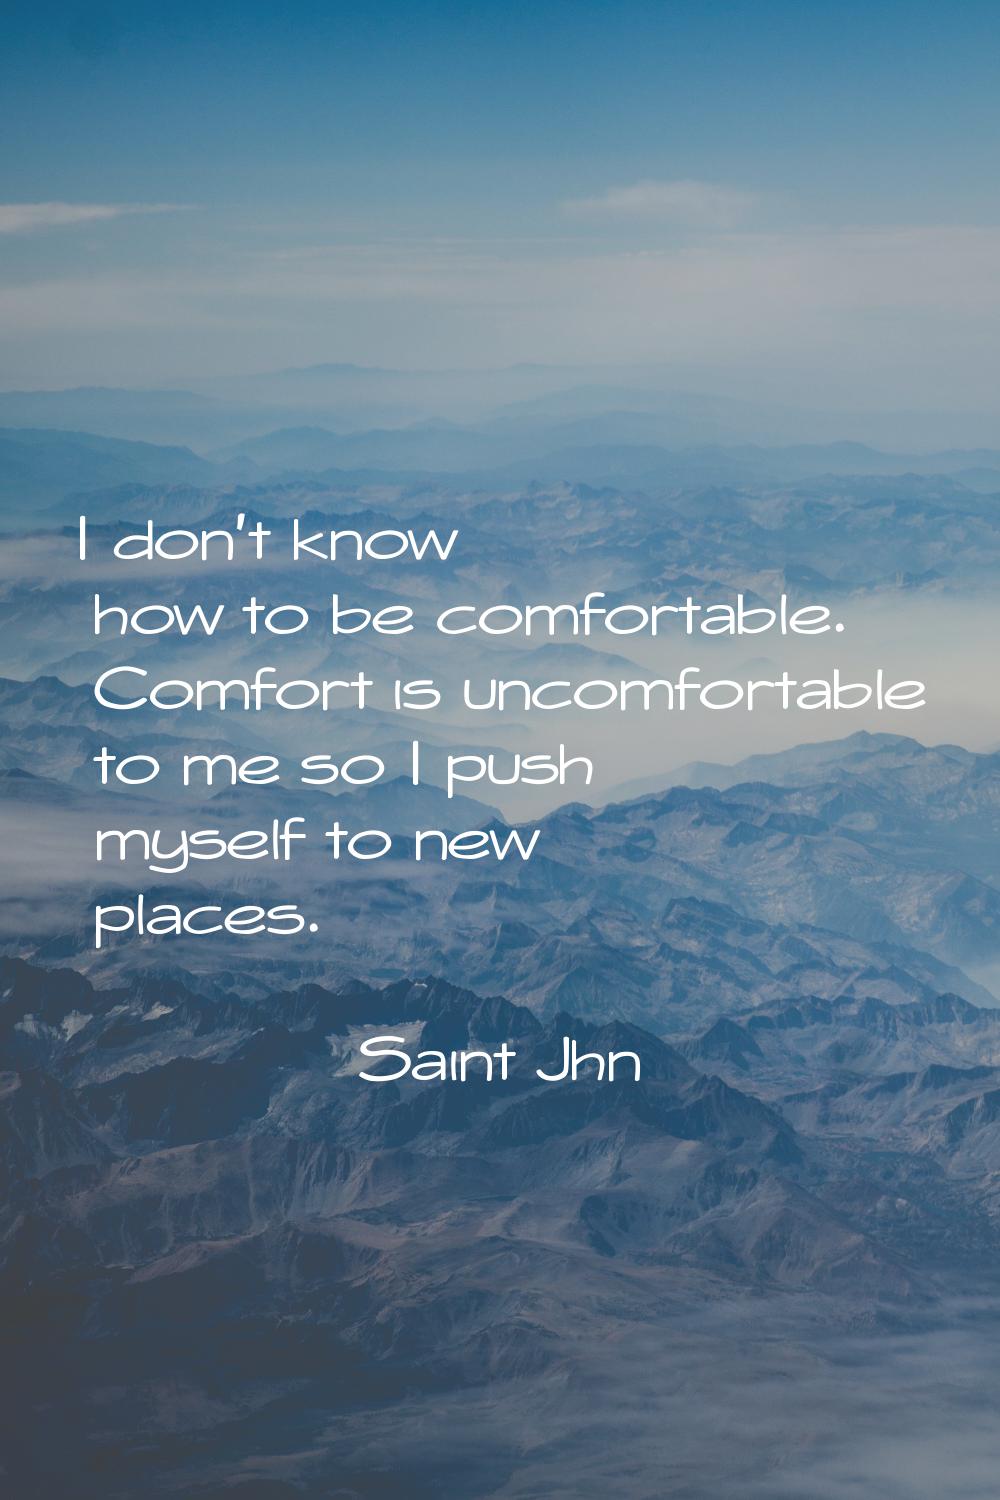 I don't know how to be comfortable. Comfort is uncomfortable to me so I push myself to new places.